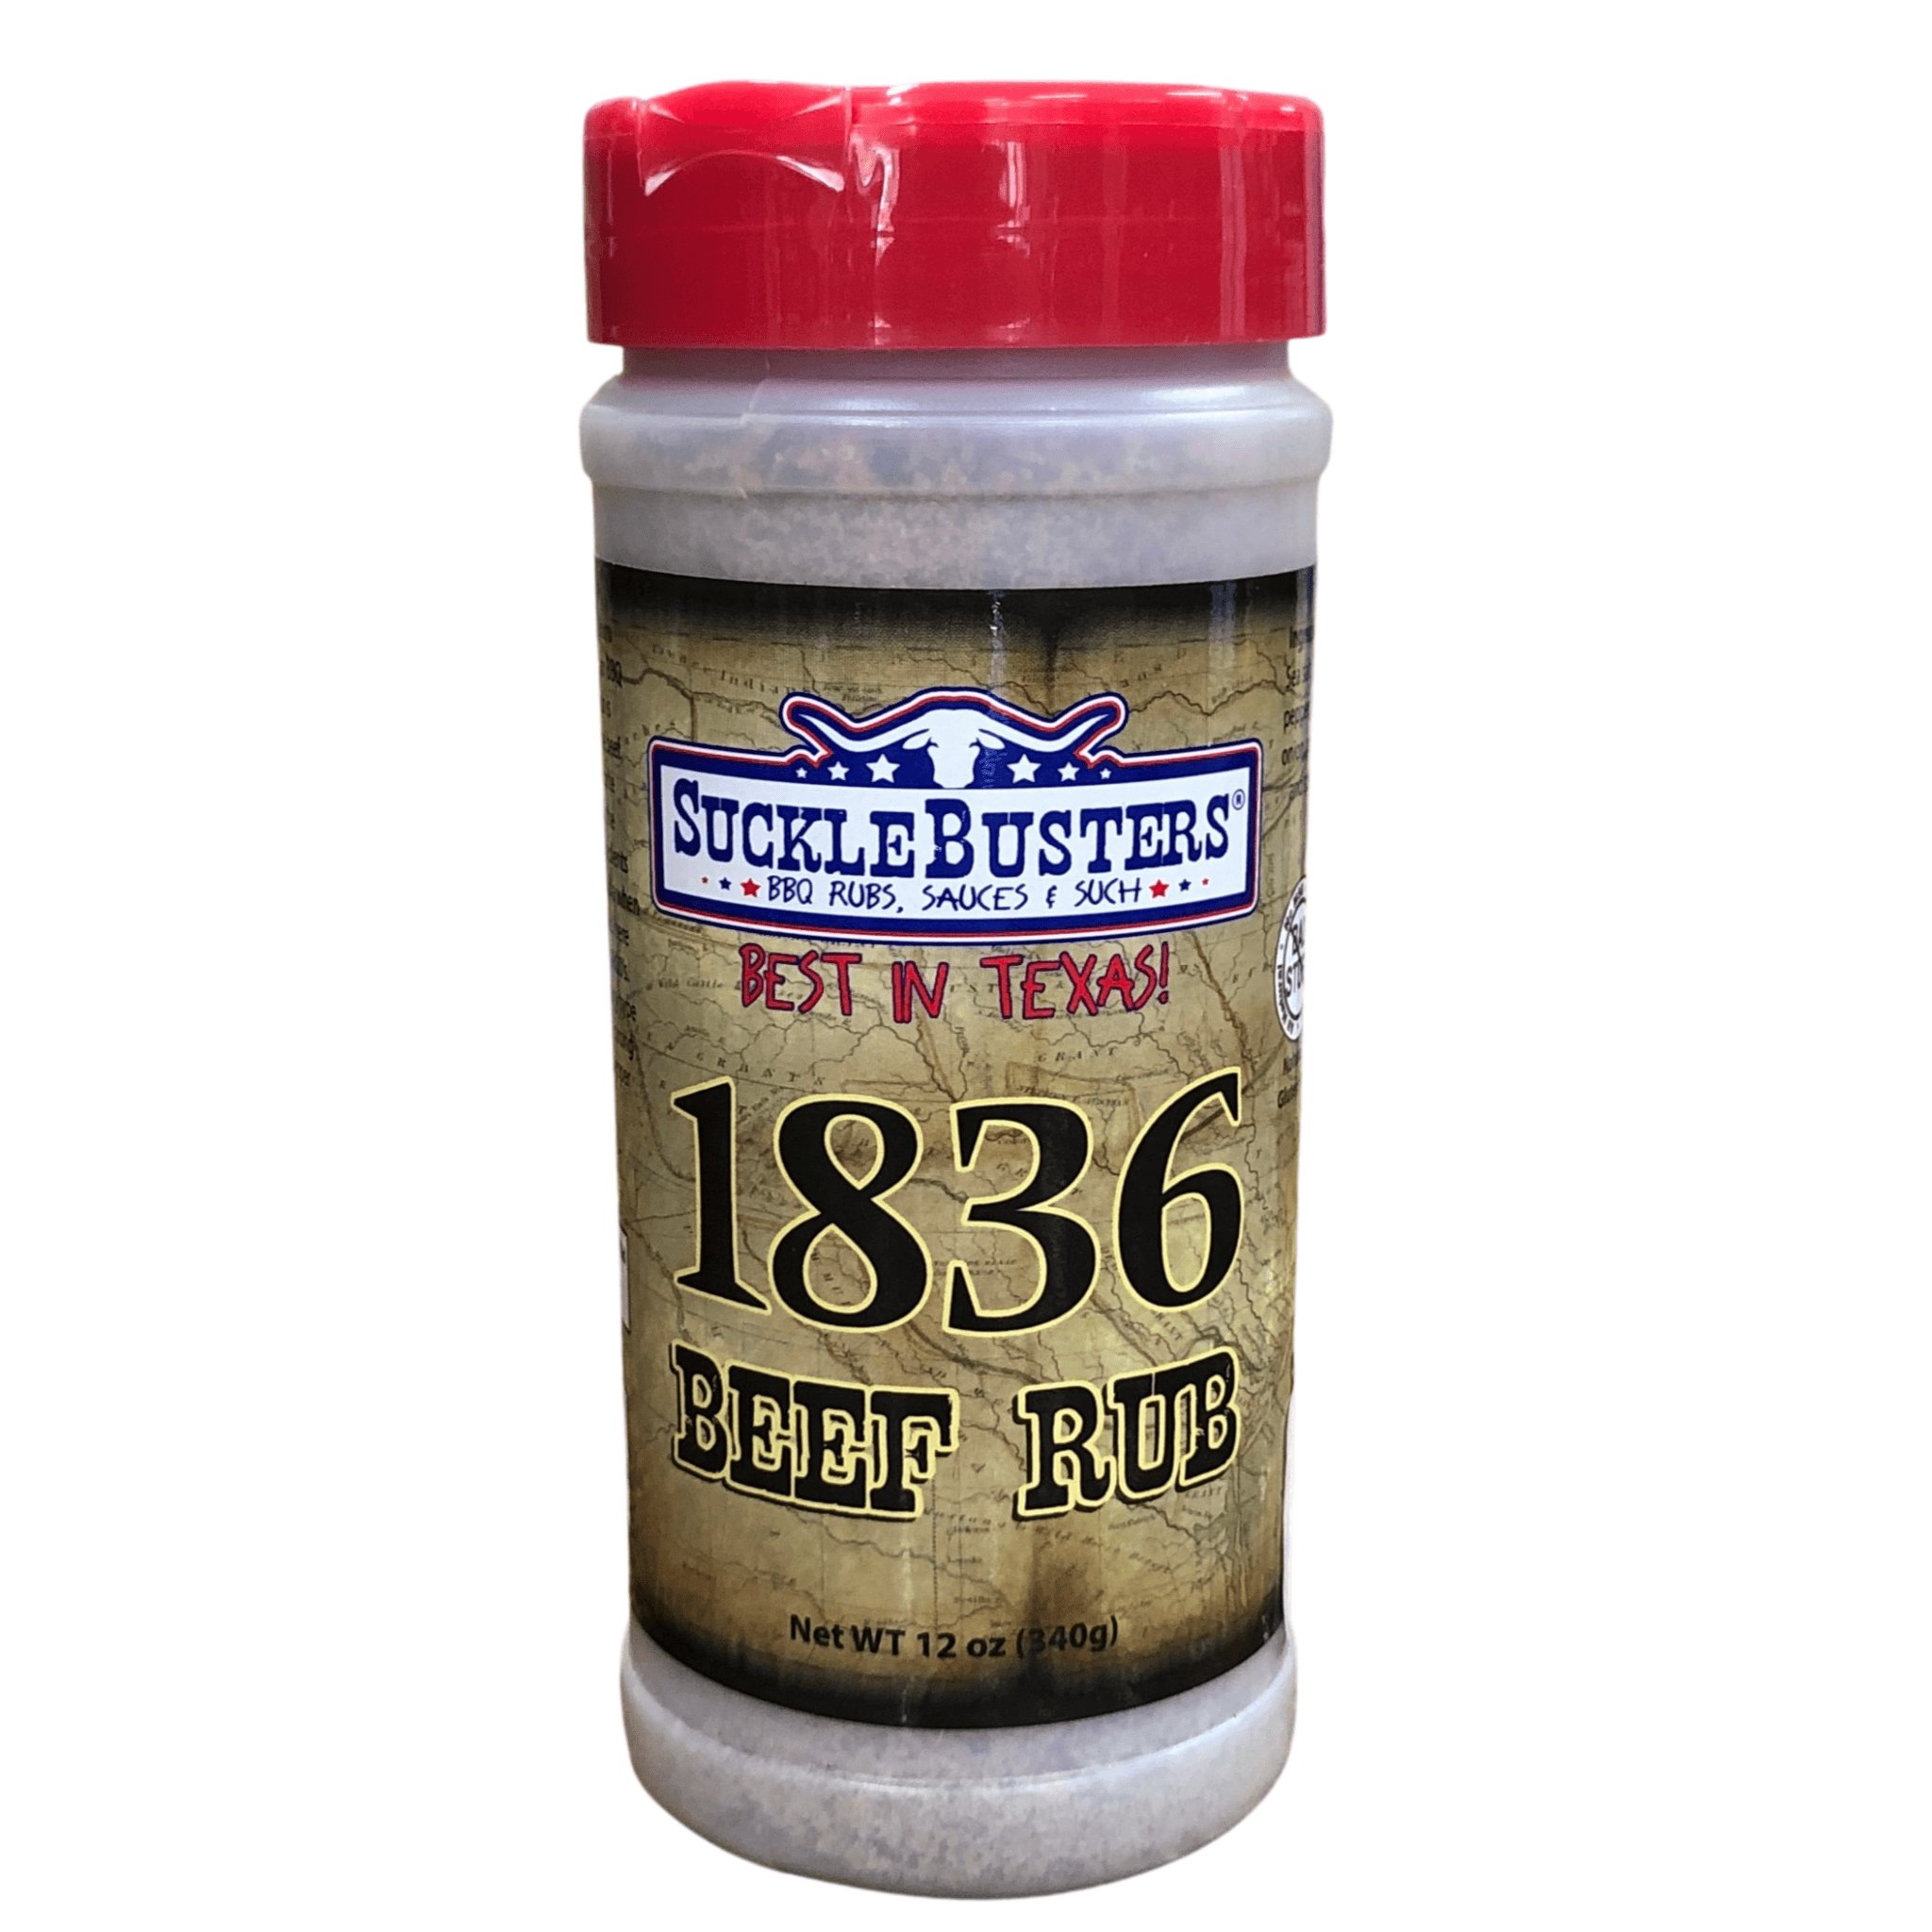 SuckleBusters 1836 Beef BBQ Rub